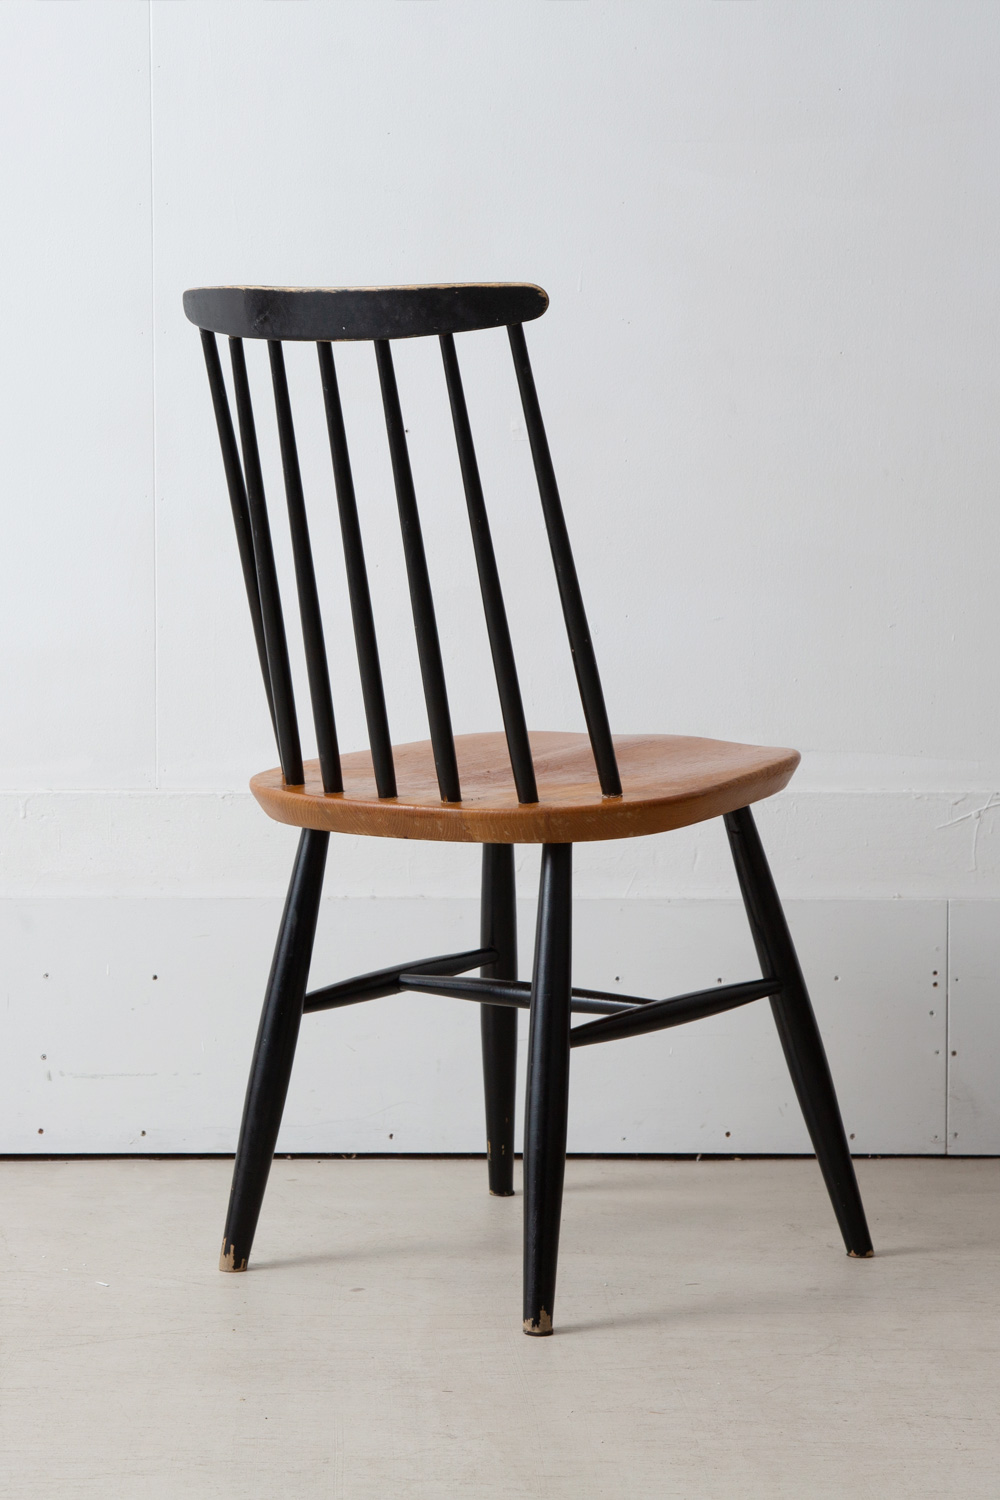 Dining Chair for Edsby Verken in Black and Wood